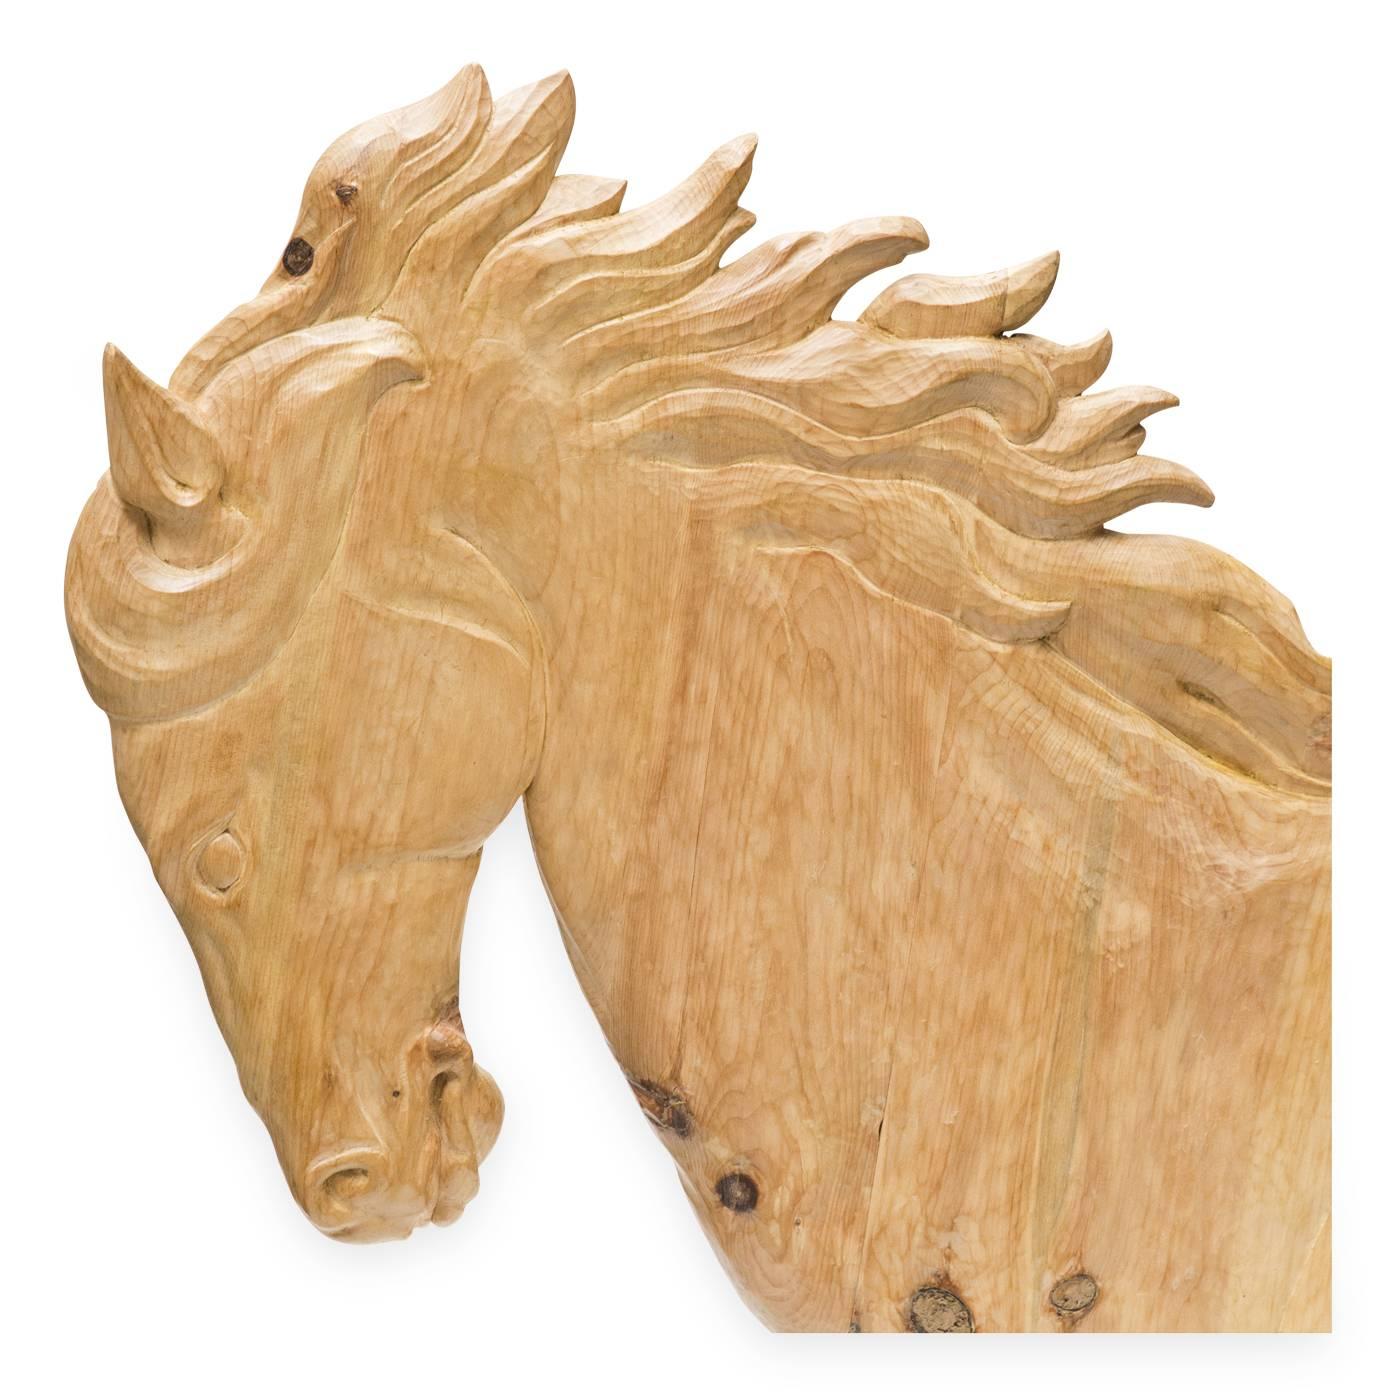 This powerful piece by Bartolozzi e Maioli is a wall decoration portraying an impressive horse mid stride. The sculpture is masterfully hand-carved in Austrian pine, having been originally designed in 1968 for an architecture studio in Zurich.